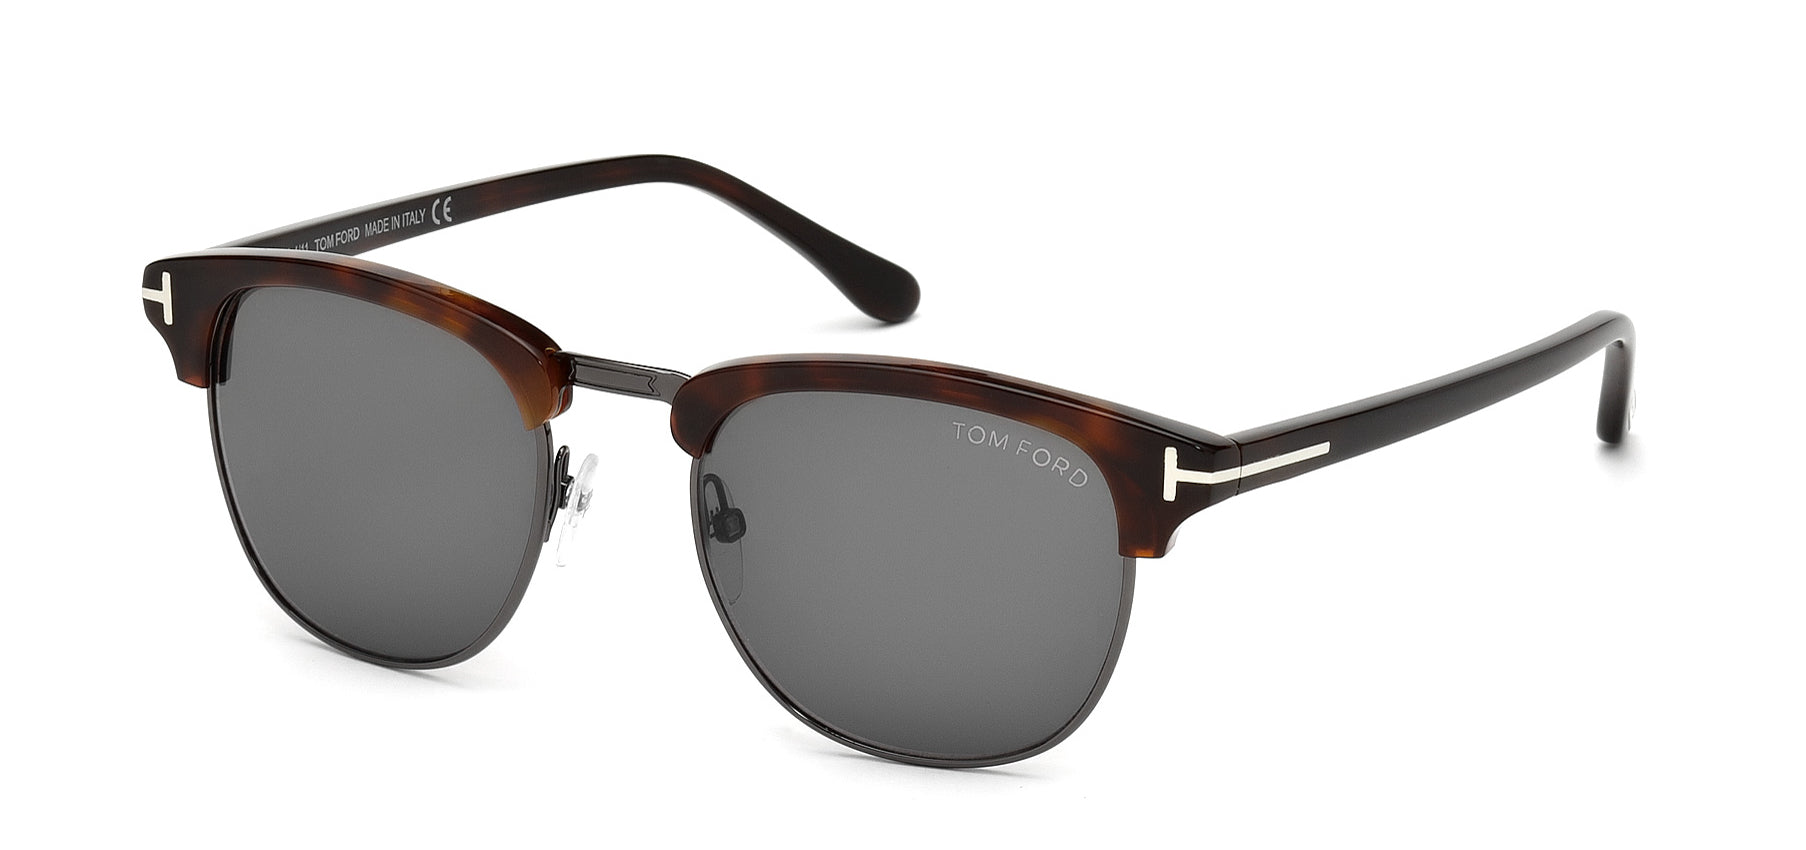 FT0862 Sunglasses Frames by Tom Ford